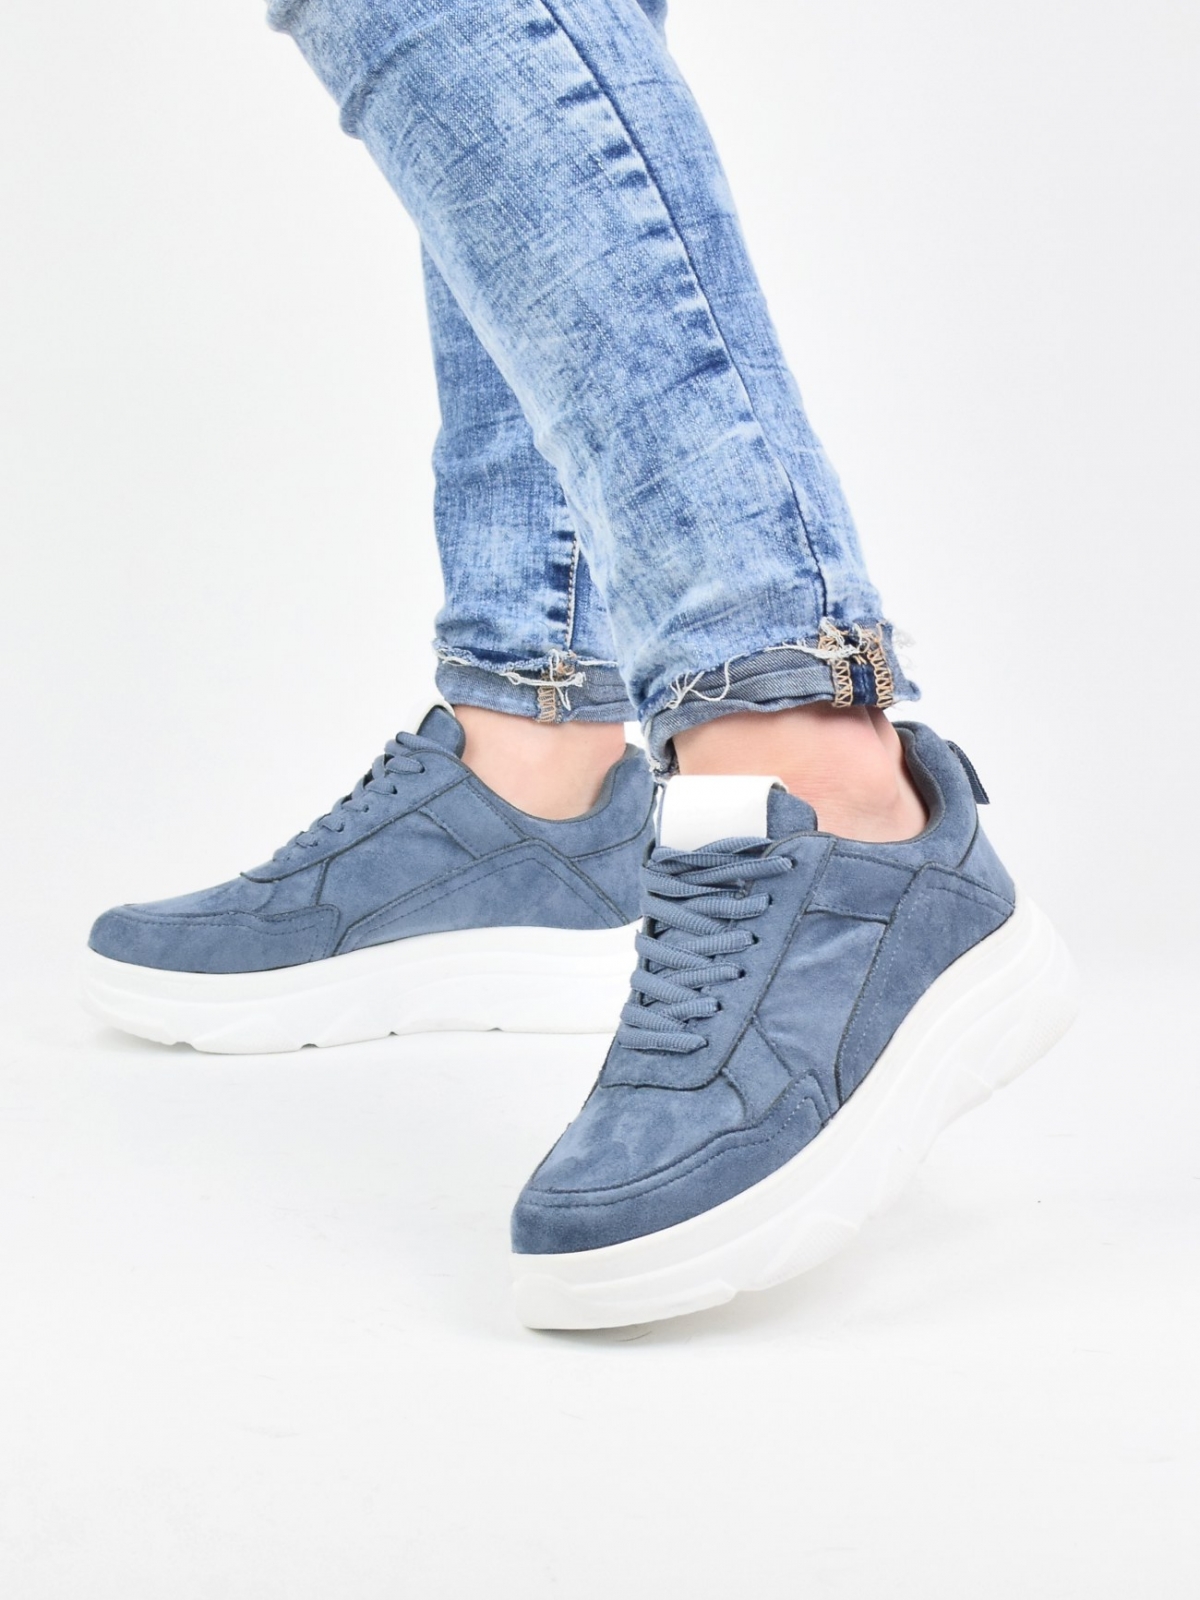 Classic design sneakers with a thick sole in blue